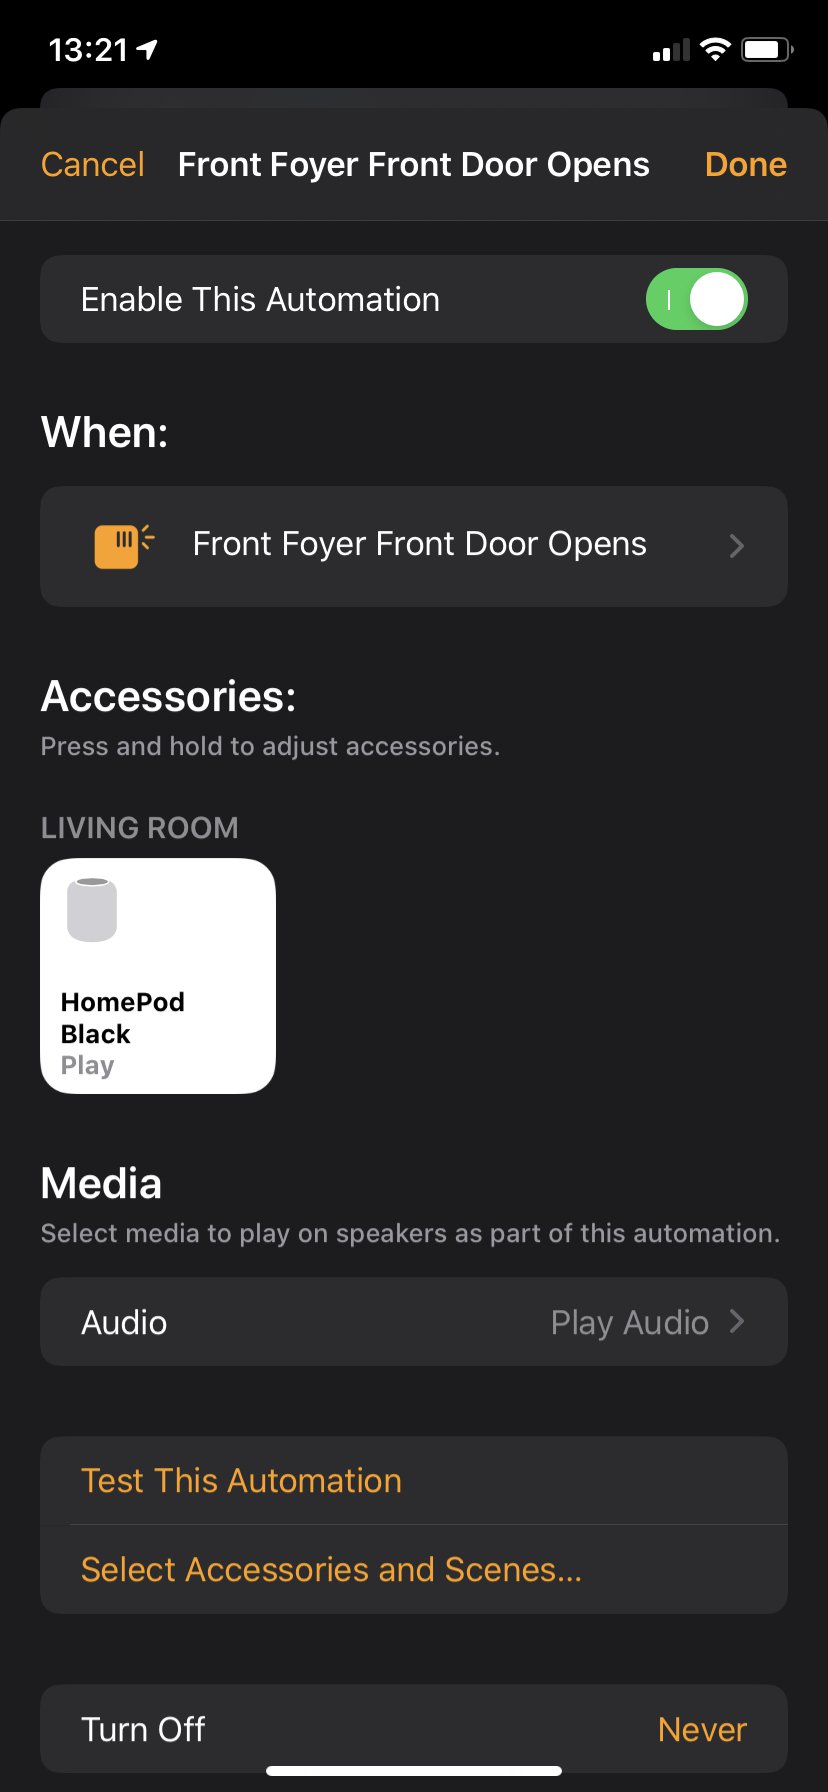 HomePod automation often plays last played song instead of song